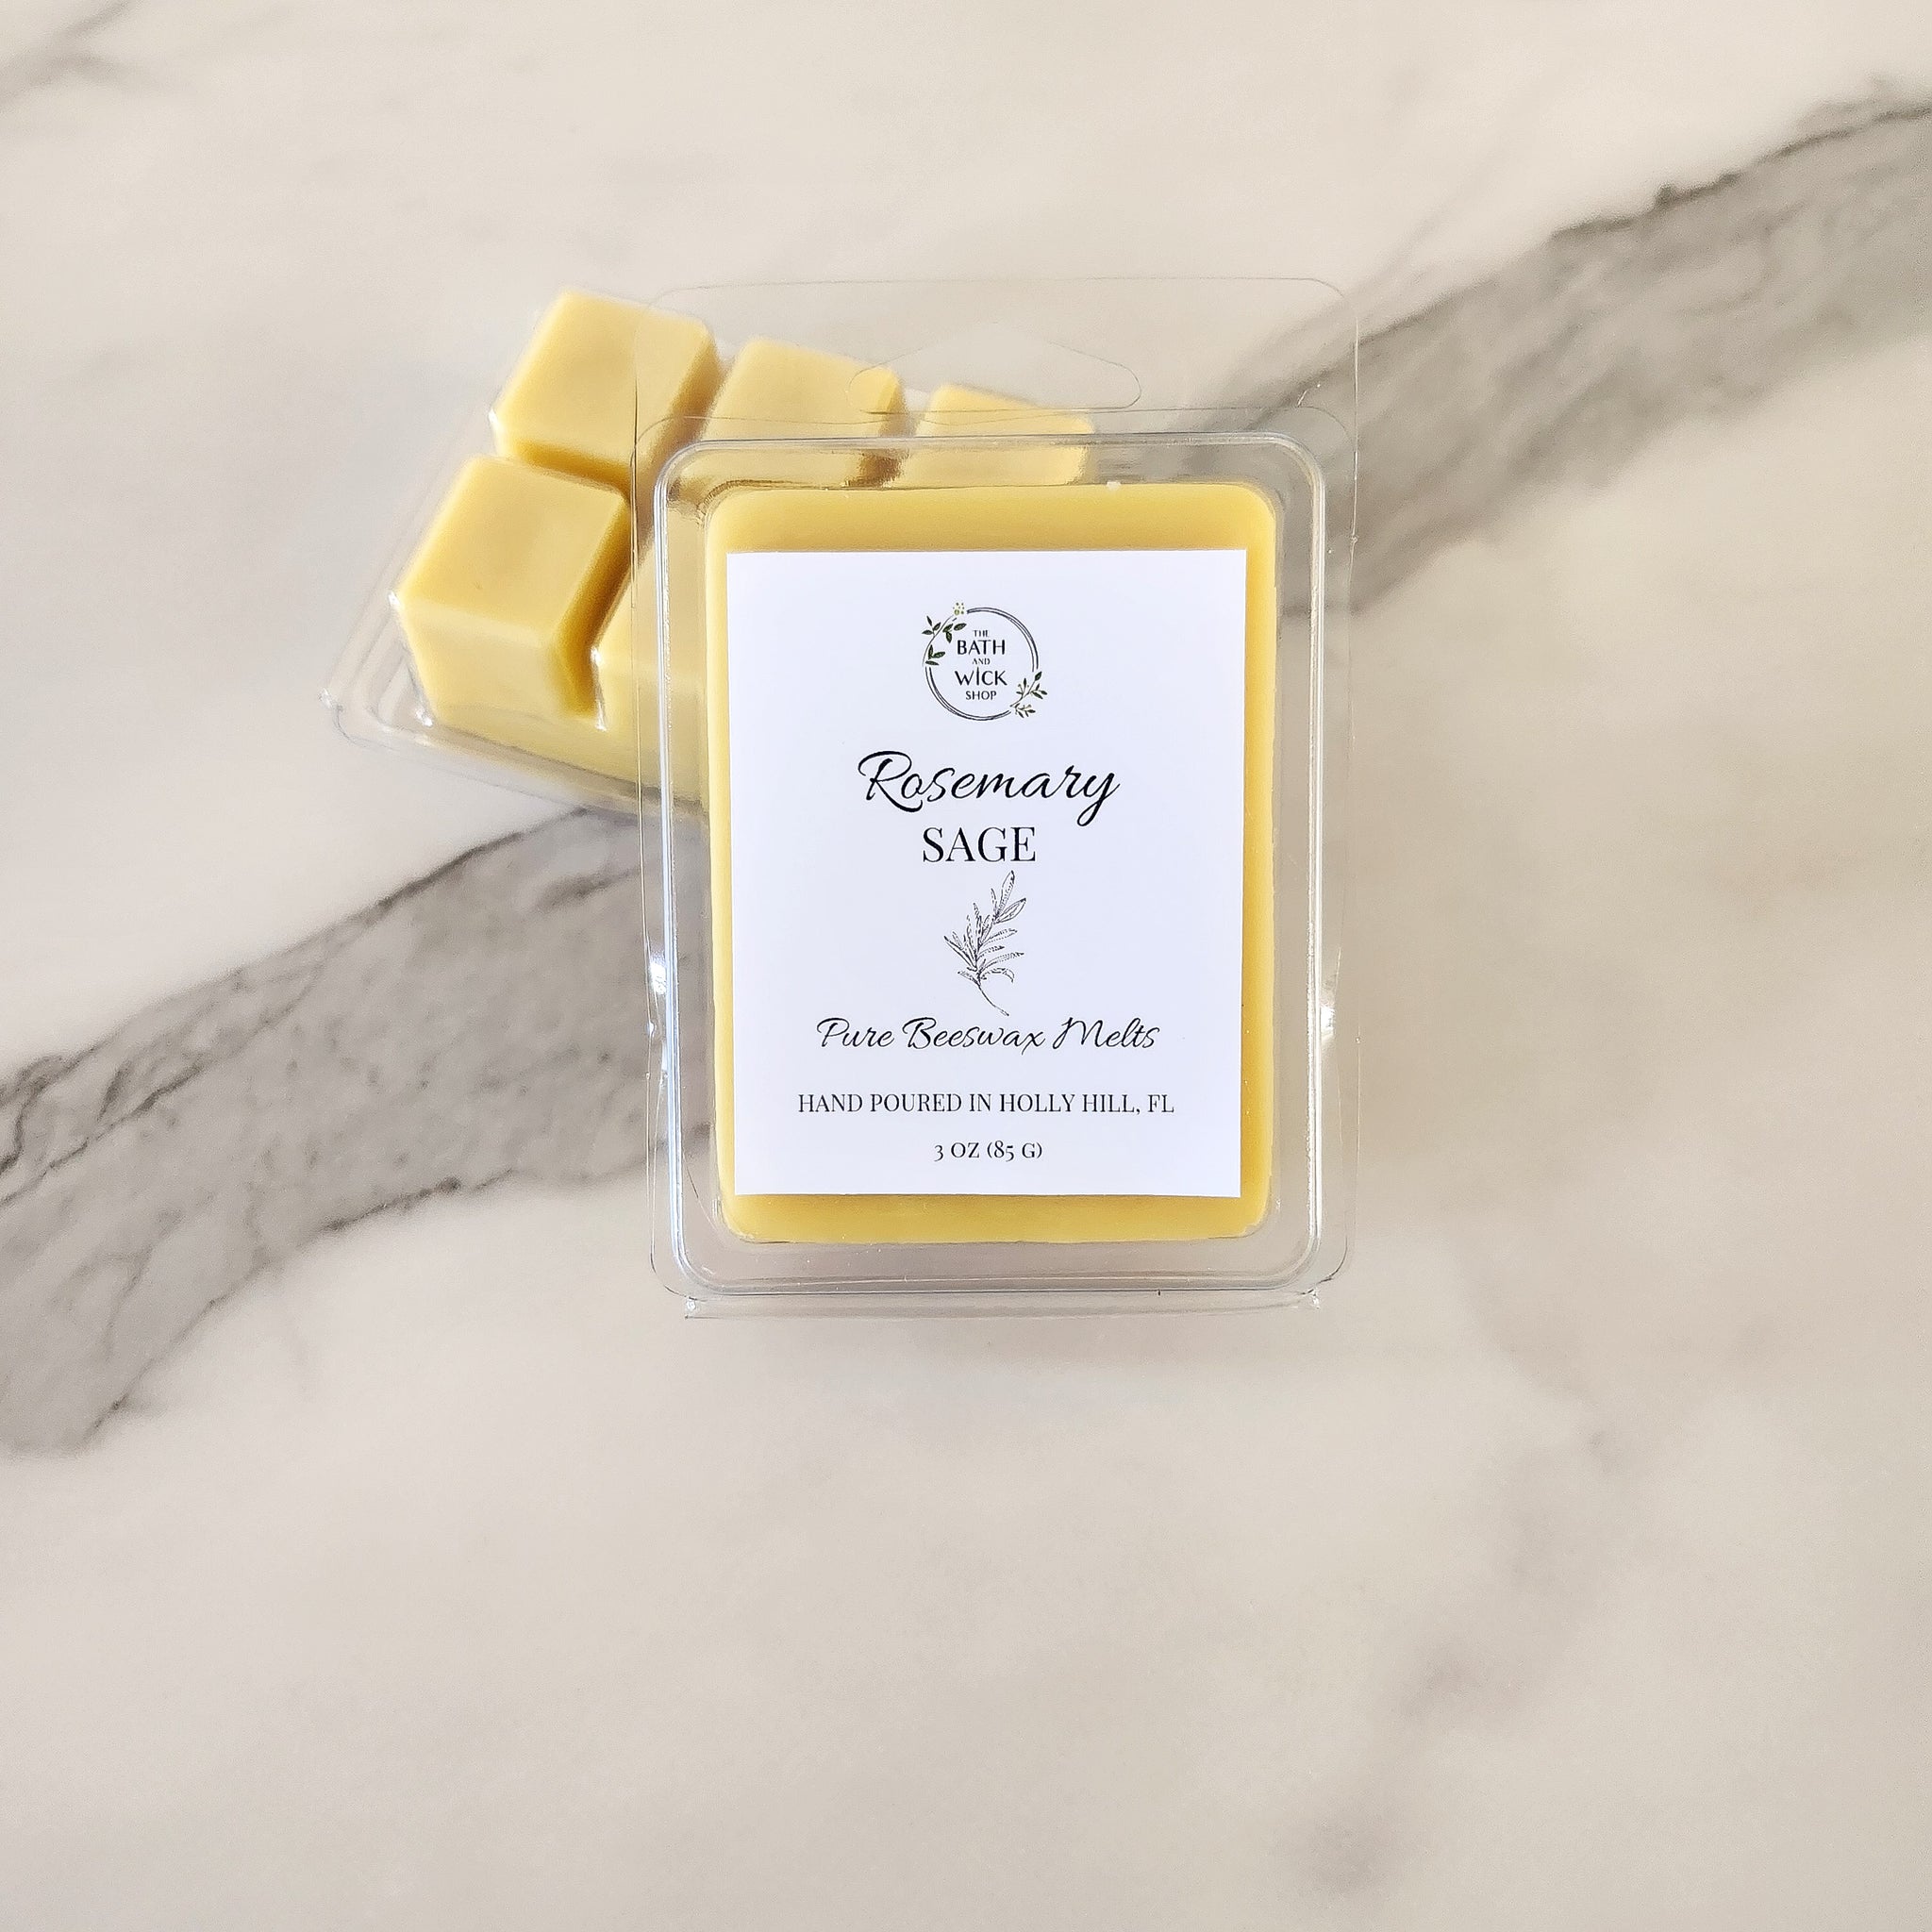 Rosemary Sage Pure Beeswax Melts